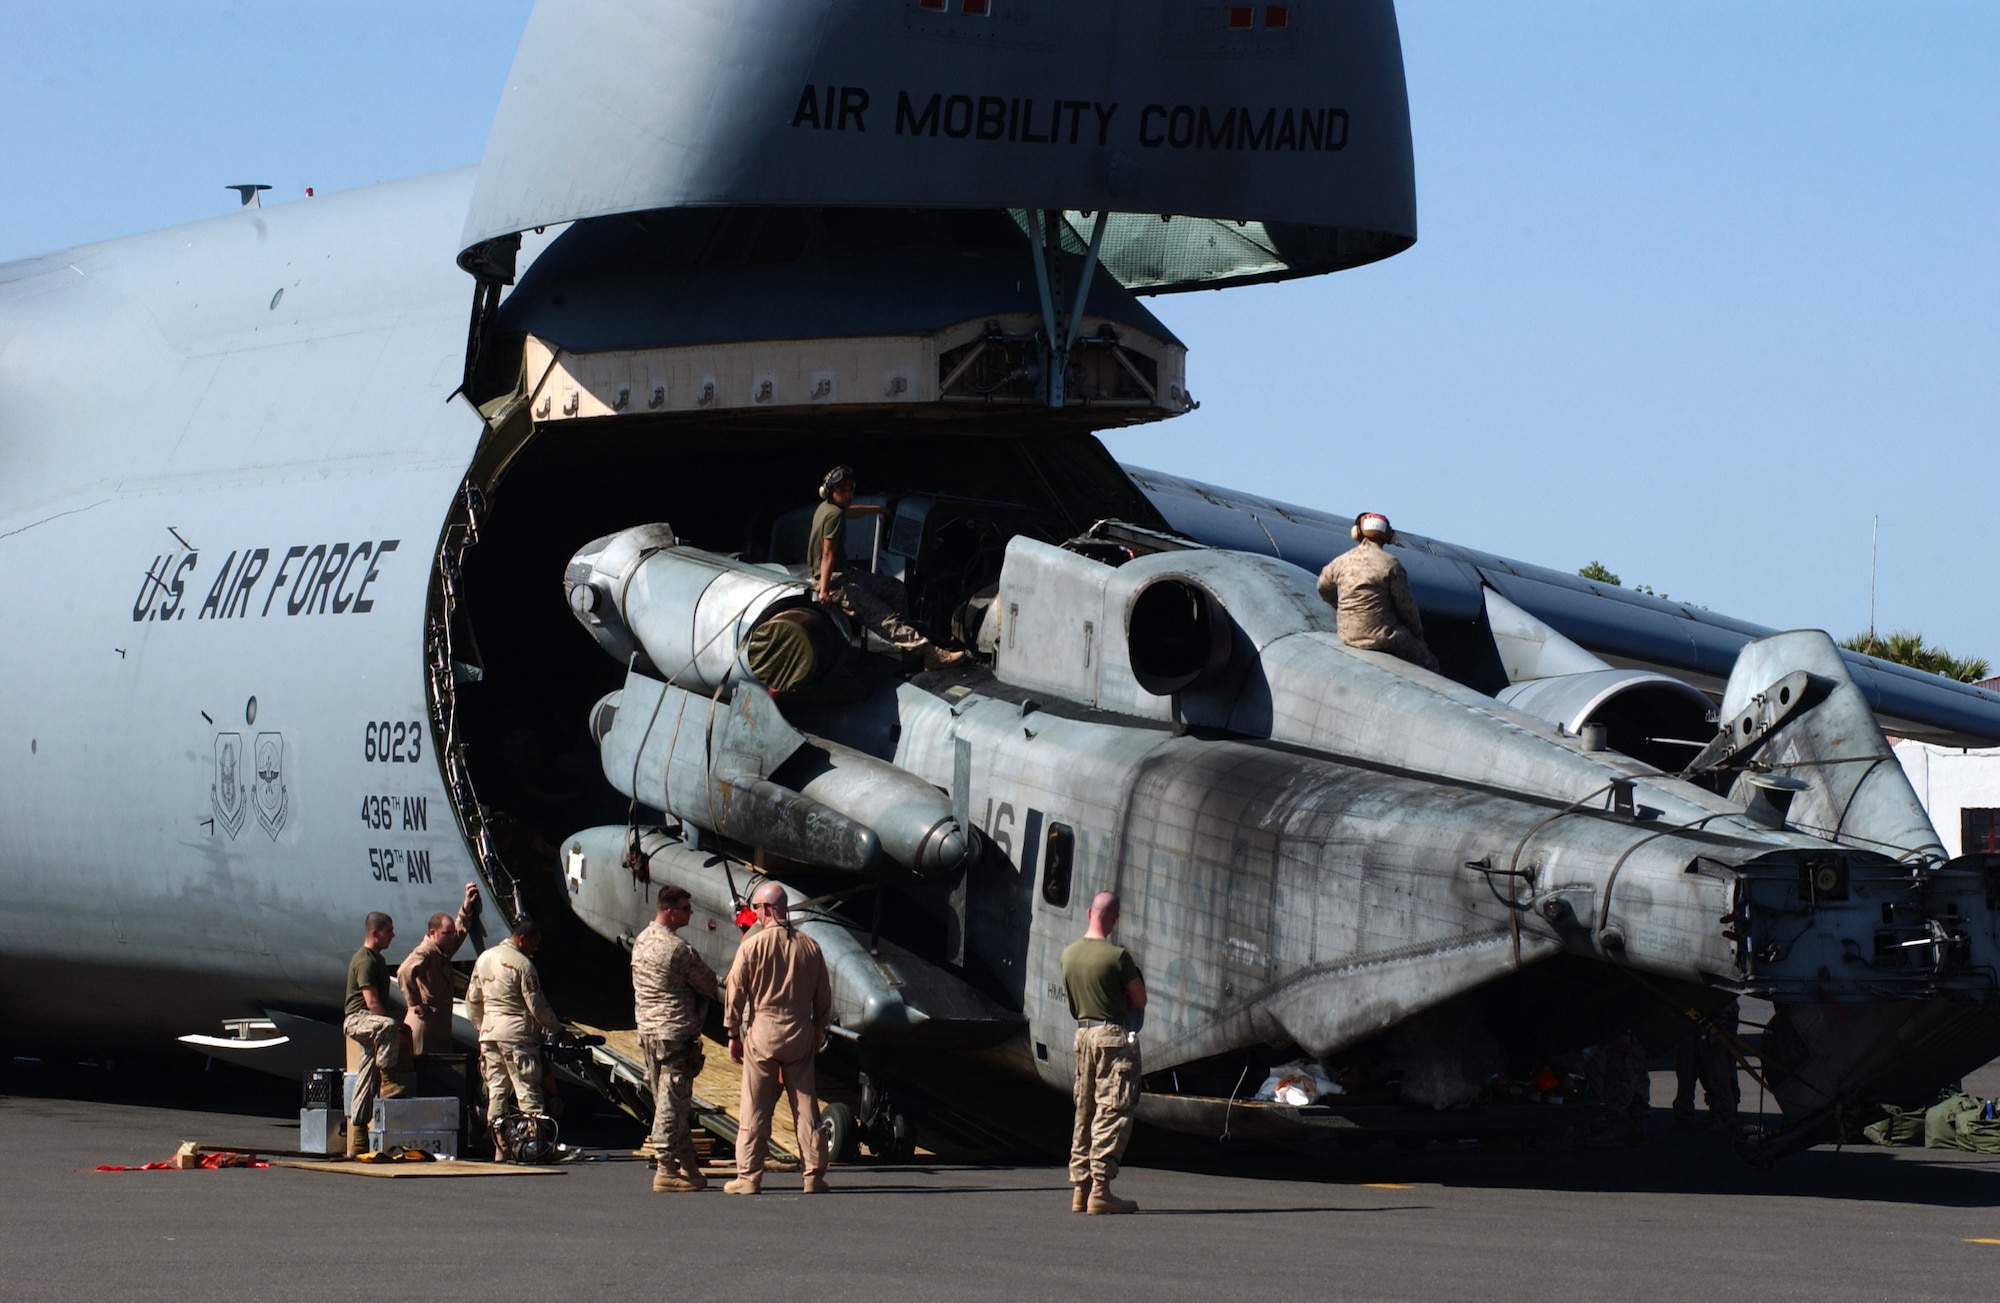 A U.S. Marine Corps CH-53E Super Stallion is offloaded from an Air Force C-5 Galaxy at the Djibouti Airport in Djibouti, Africa, Friday, March 3, 2006. (U.S. Air Force photo/Staff Sgt. Nic Raven)